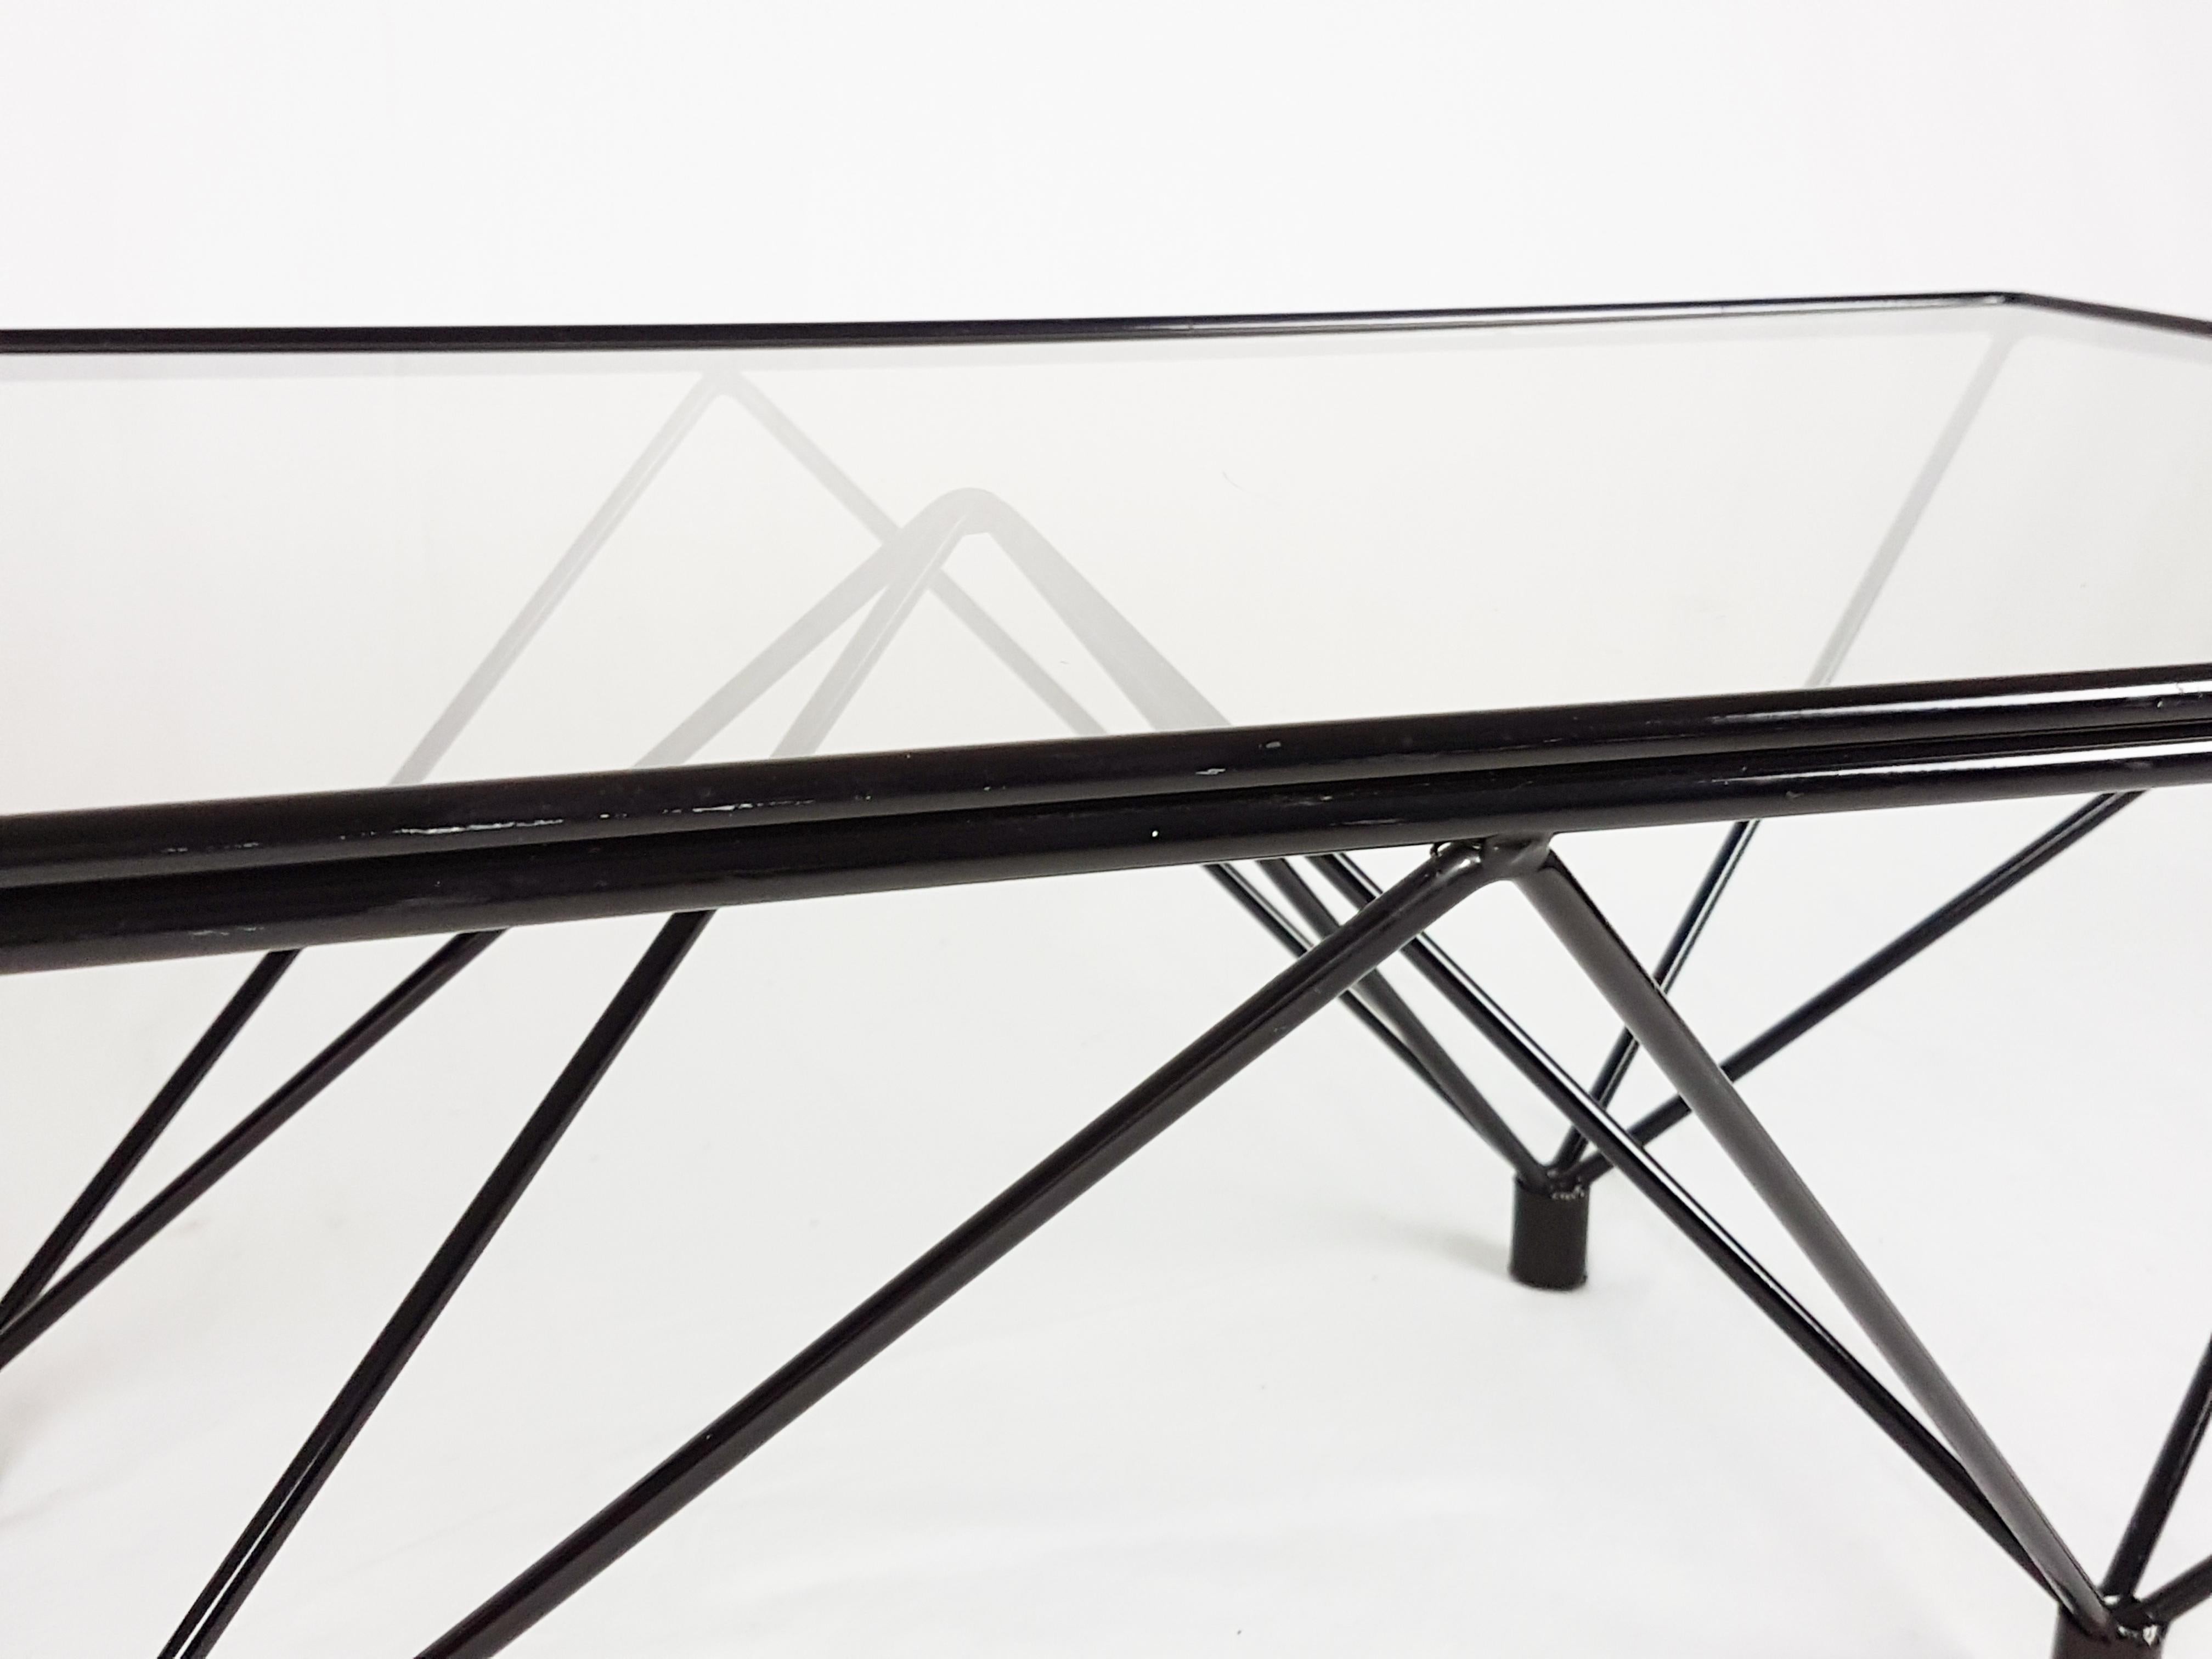 Late 20th Century Black Metal and Smoked Glass 1980s Coffee Table Alanda Attributed to P. Piva